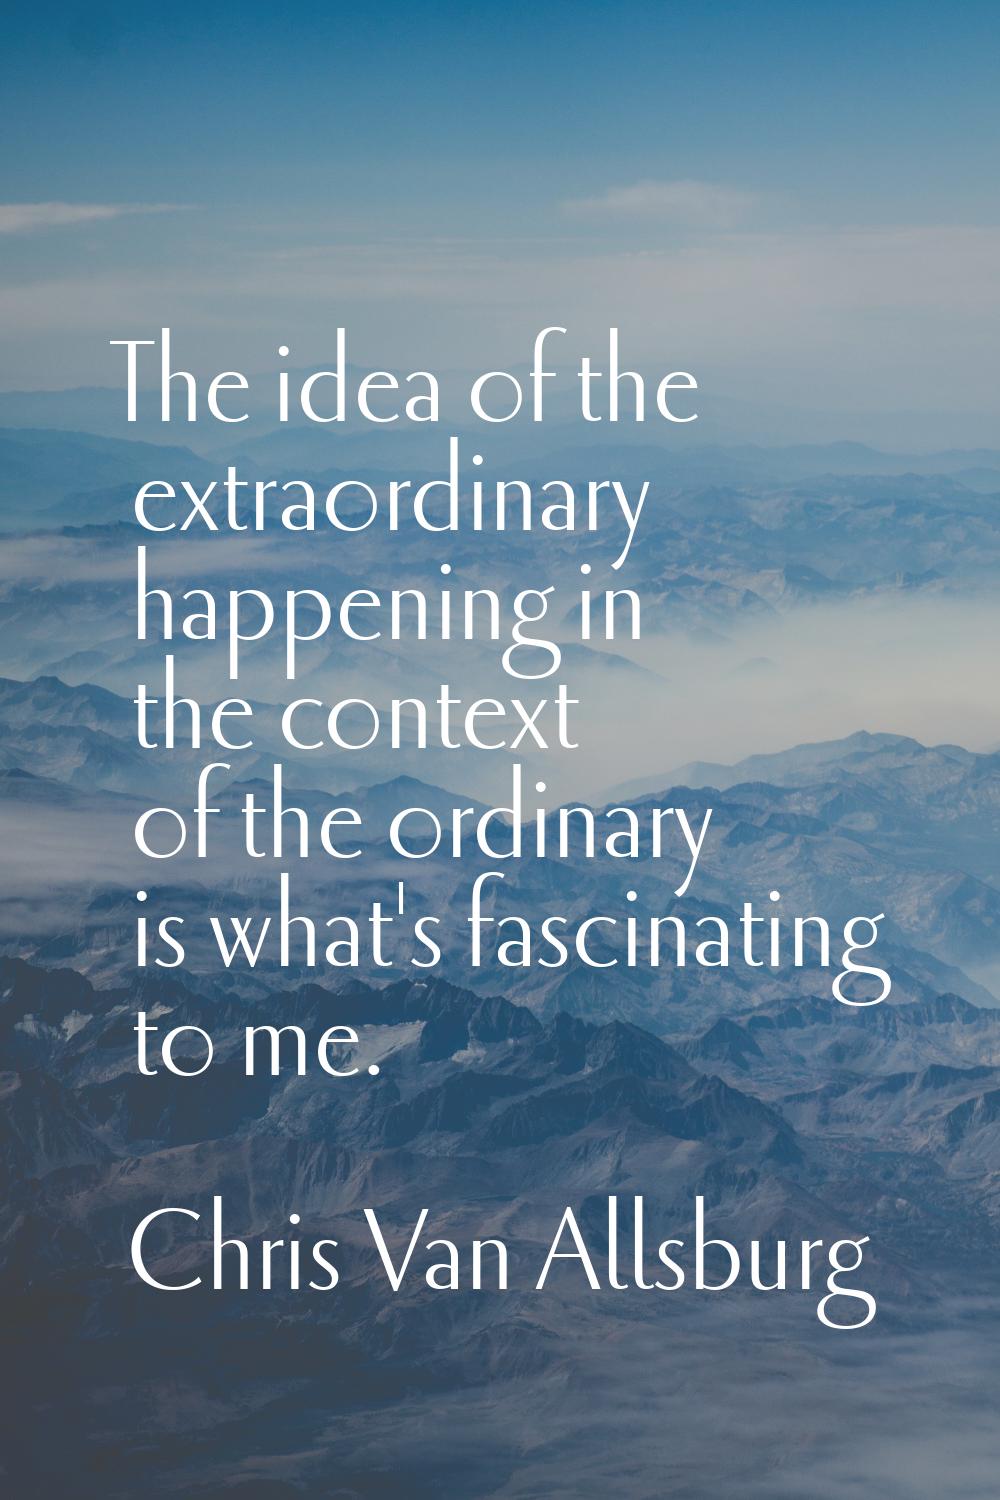 The idea of the extraordinary happening in the context of the ordinary is what's fascinating to me.